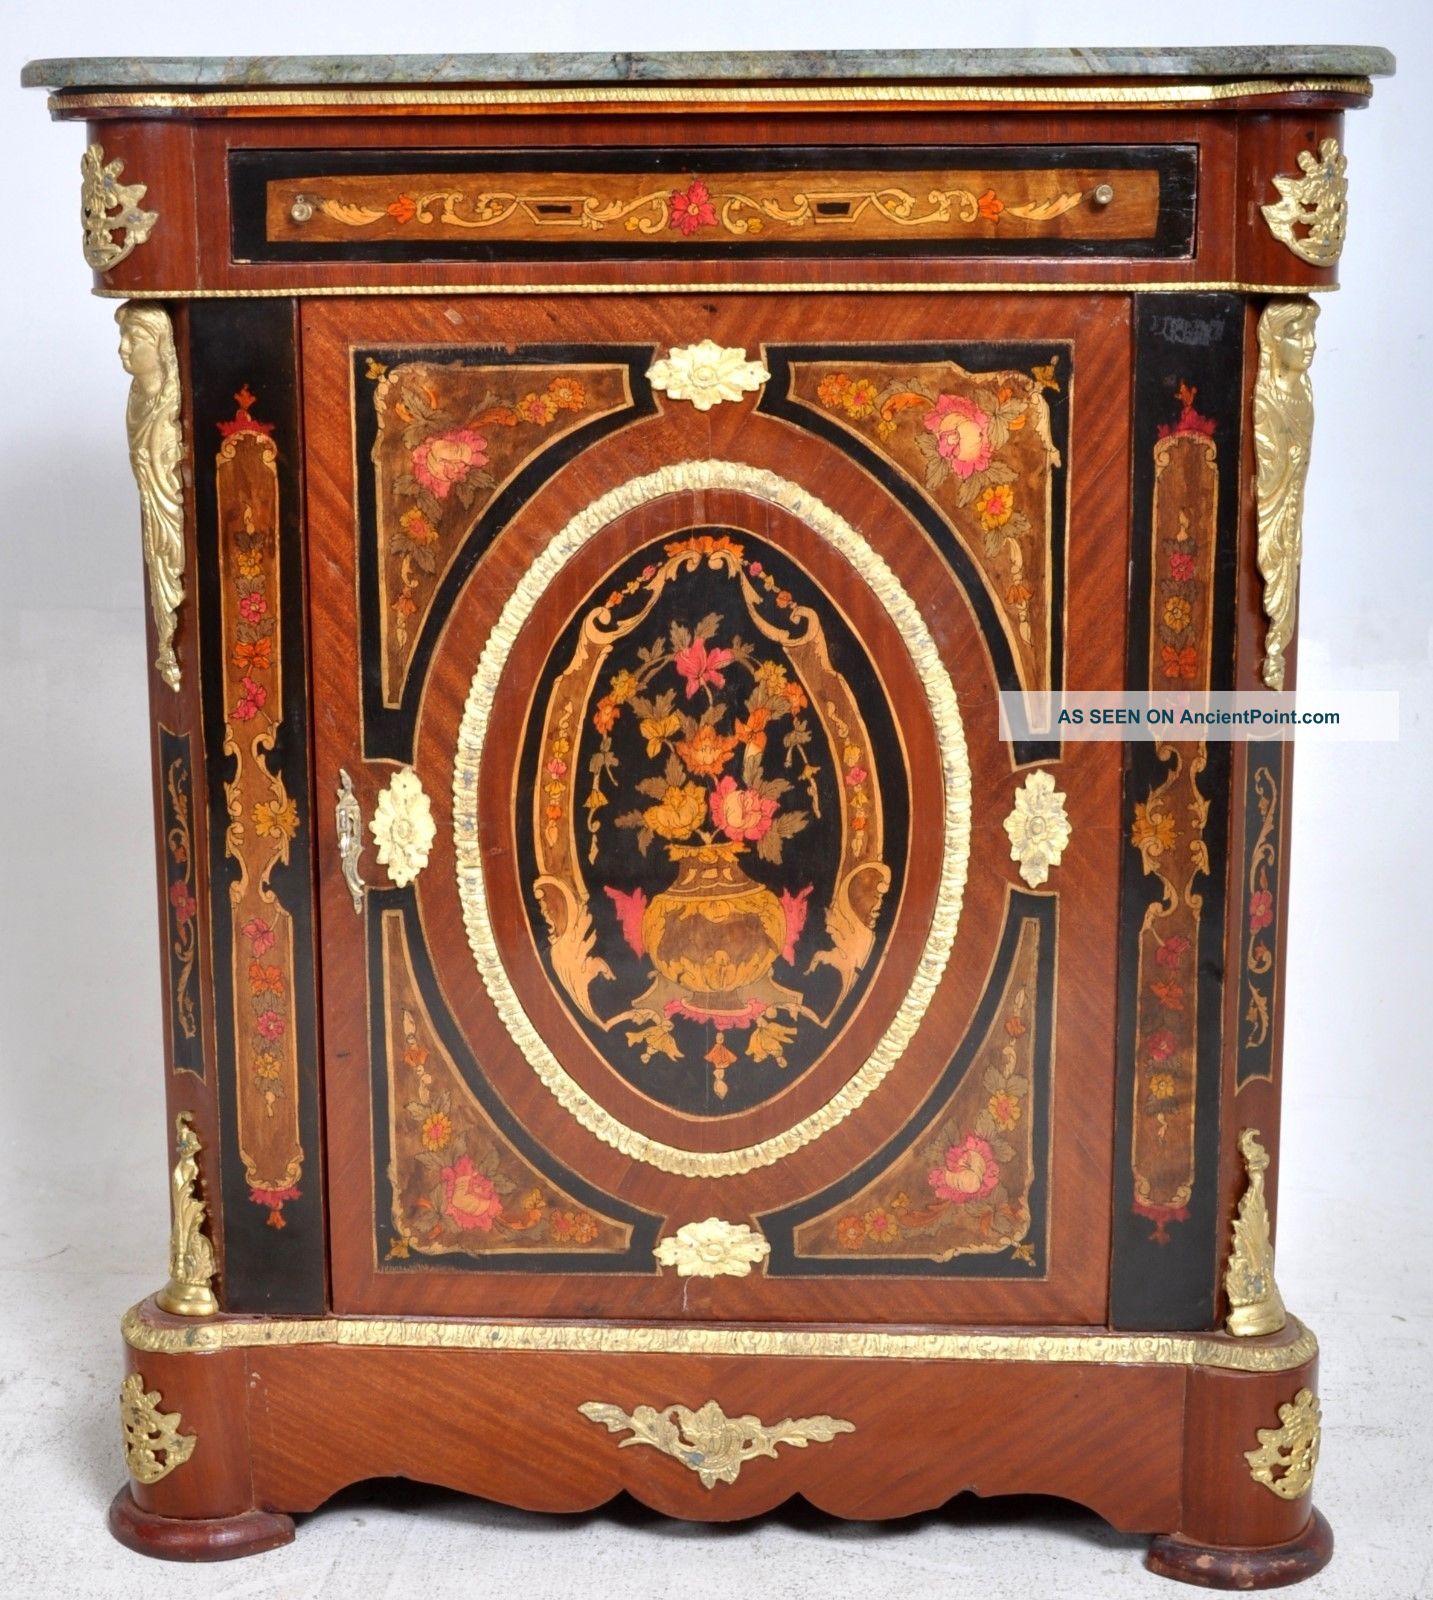 Fine Antique French Marquetry Ormolu Louis Xv Marble Top Pier Cabinet 1890 1800-1899 photo